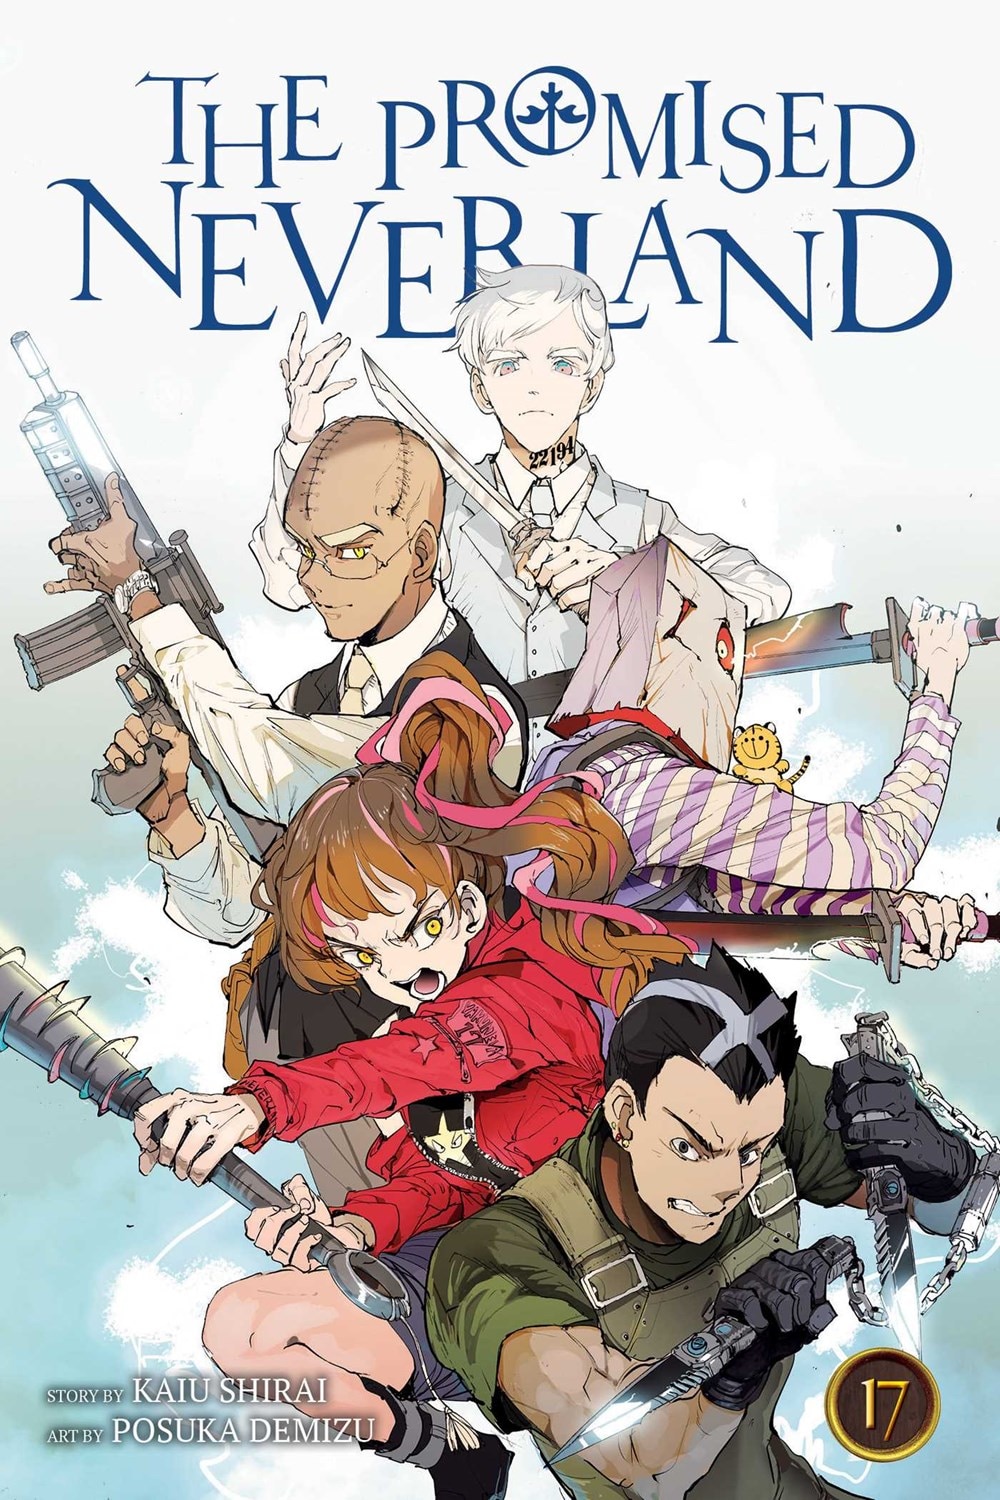 The Promised Neverland  Vol. 17  17